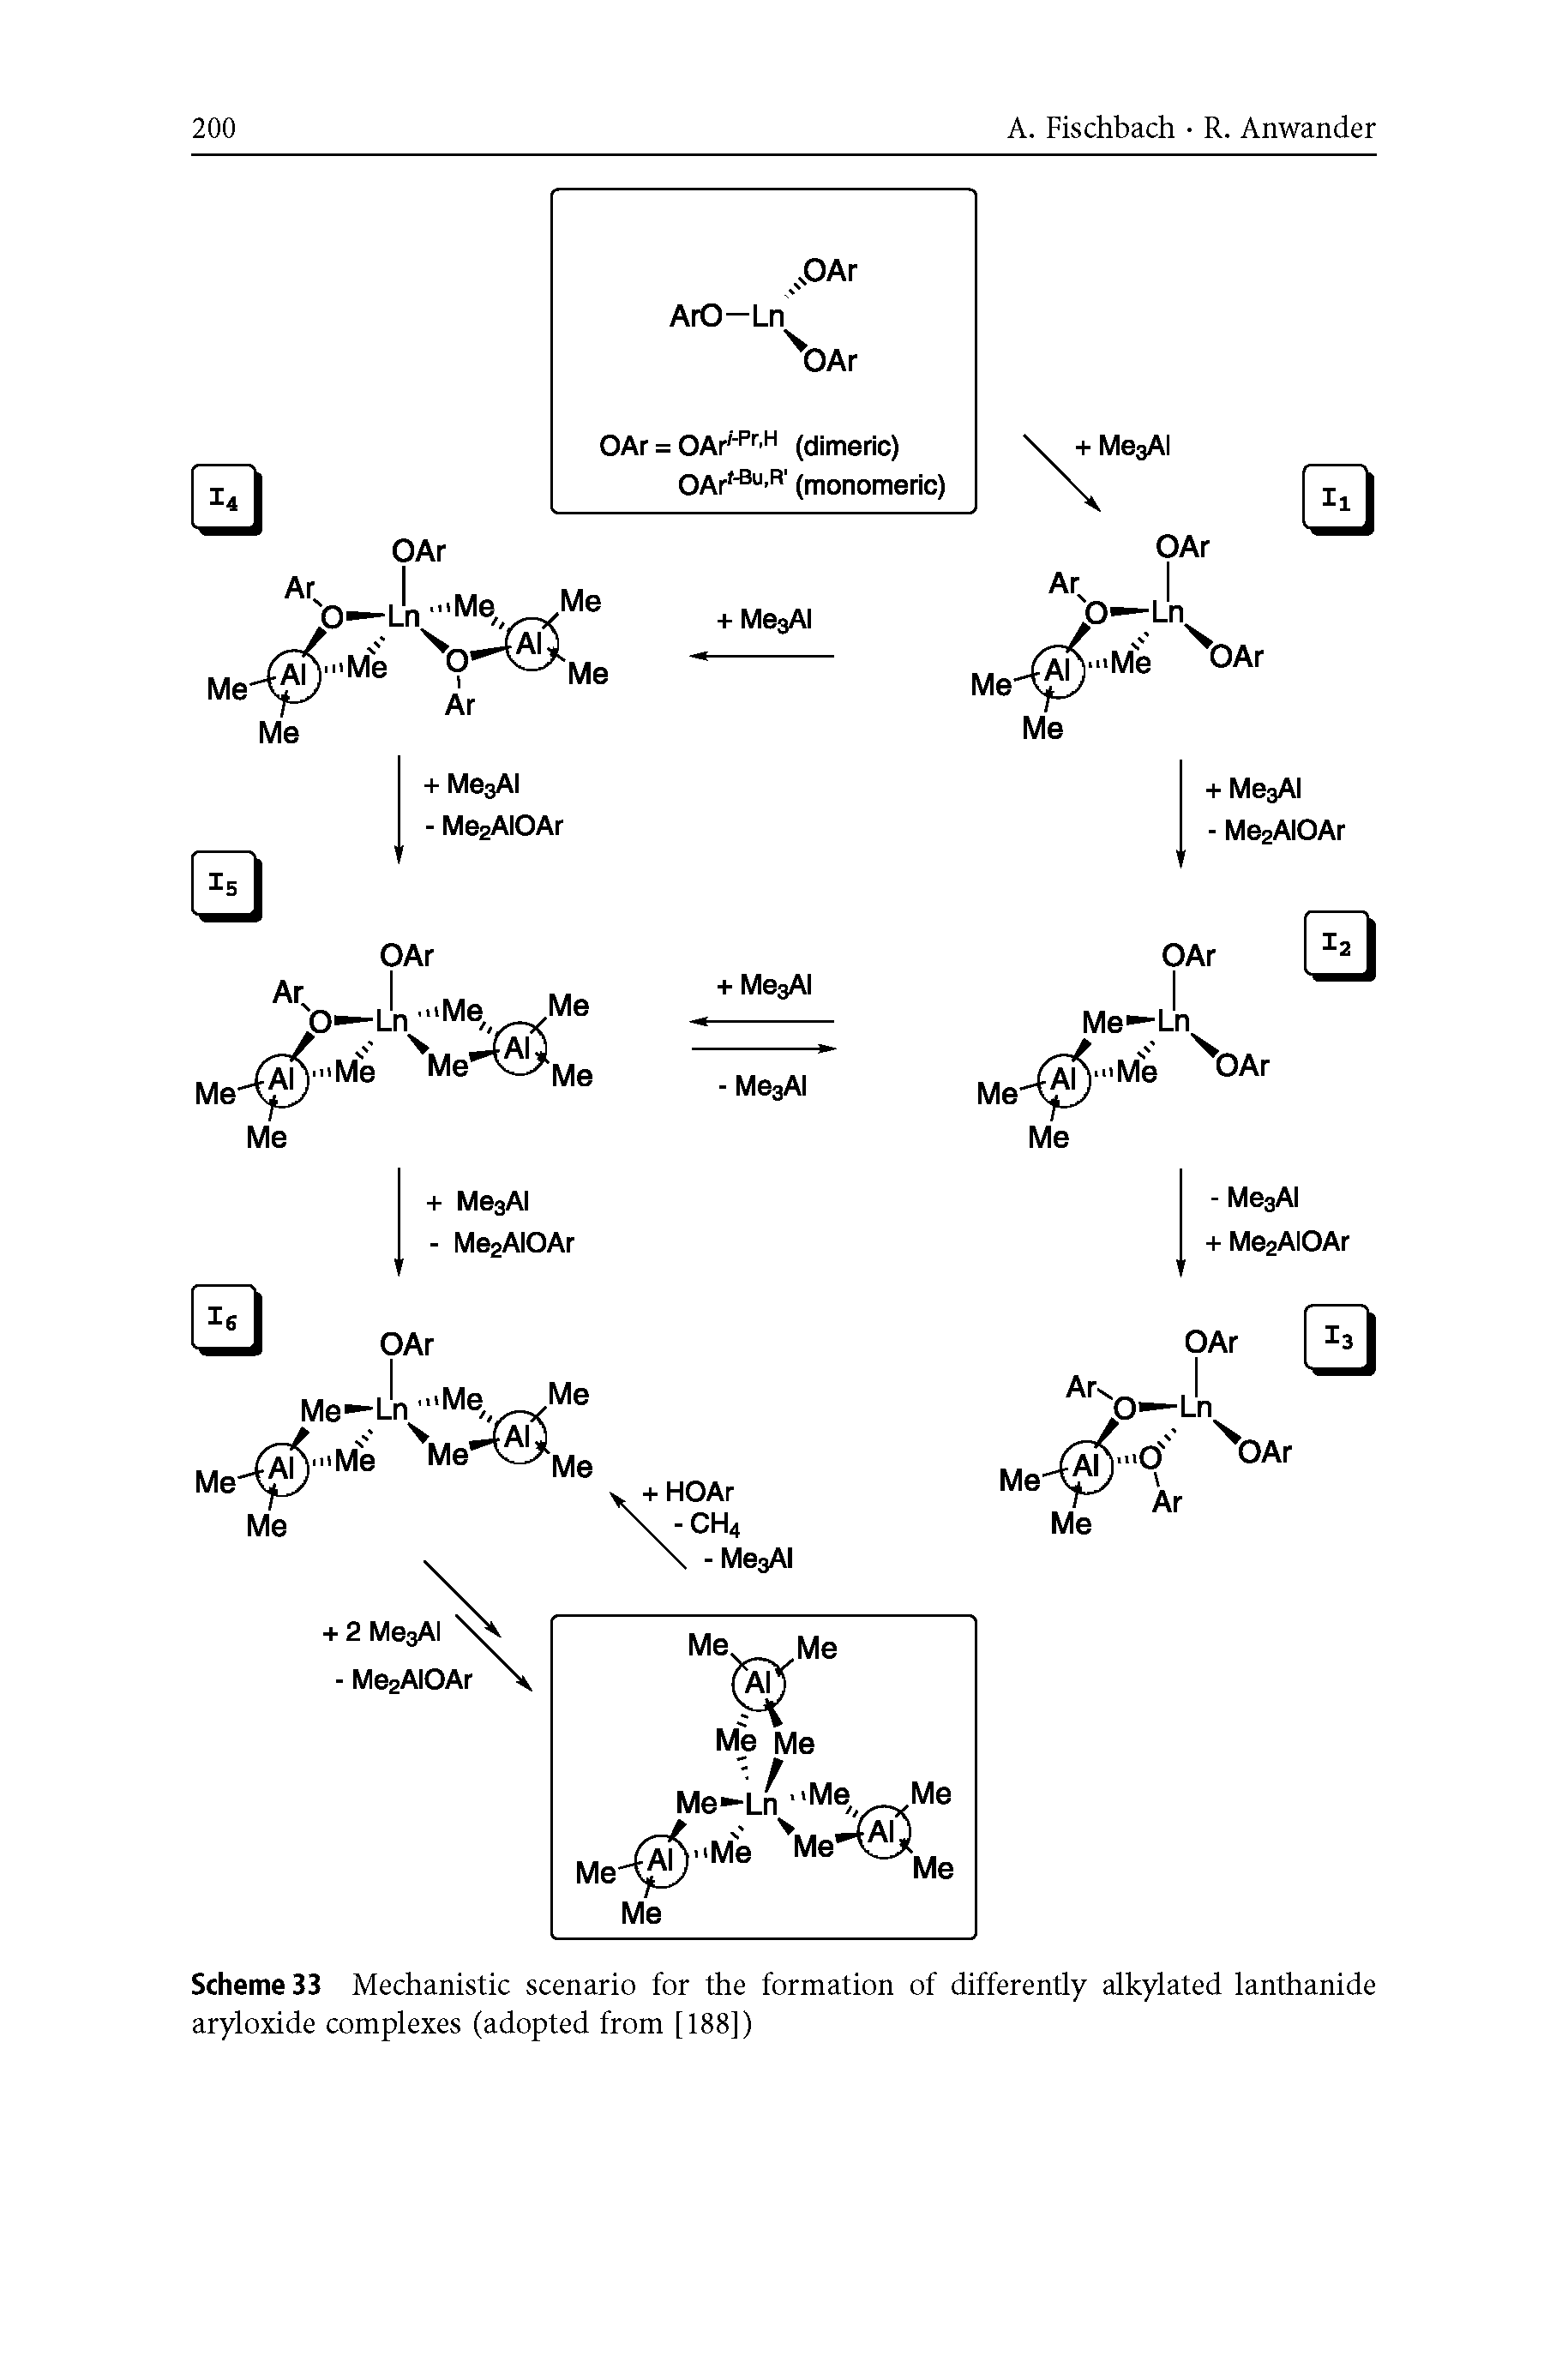 Scheme 33 Mechanistic scenario for the formation of differently alkylated lanthanide aryloxide complexes (adopted from [188])...